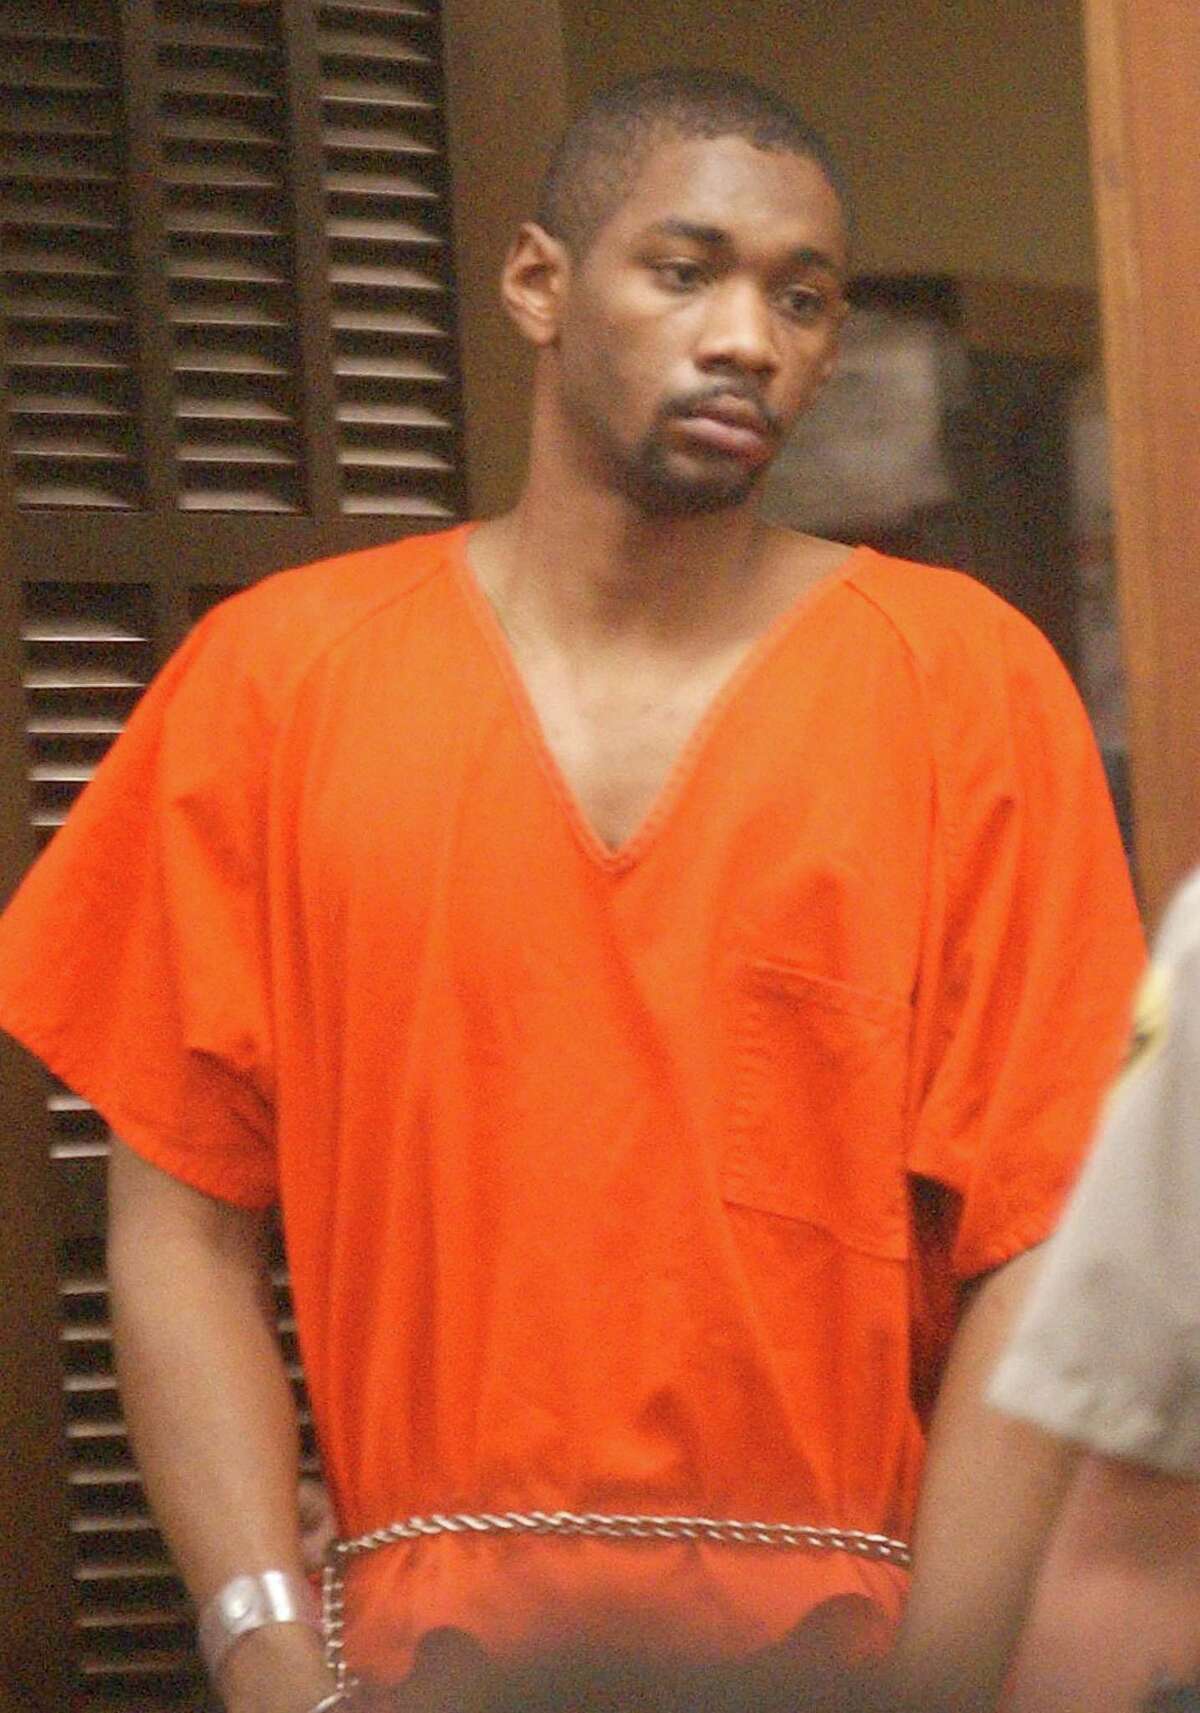 Former Baylor basketball player Carlton Dotson appears in 54th District Court for his arraignment on Oct. 29, 2003, in Waco on charges in the shooting death of former teammate Patrick Dennehy.